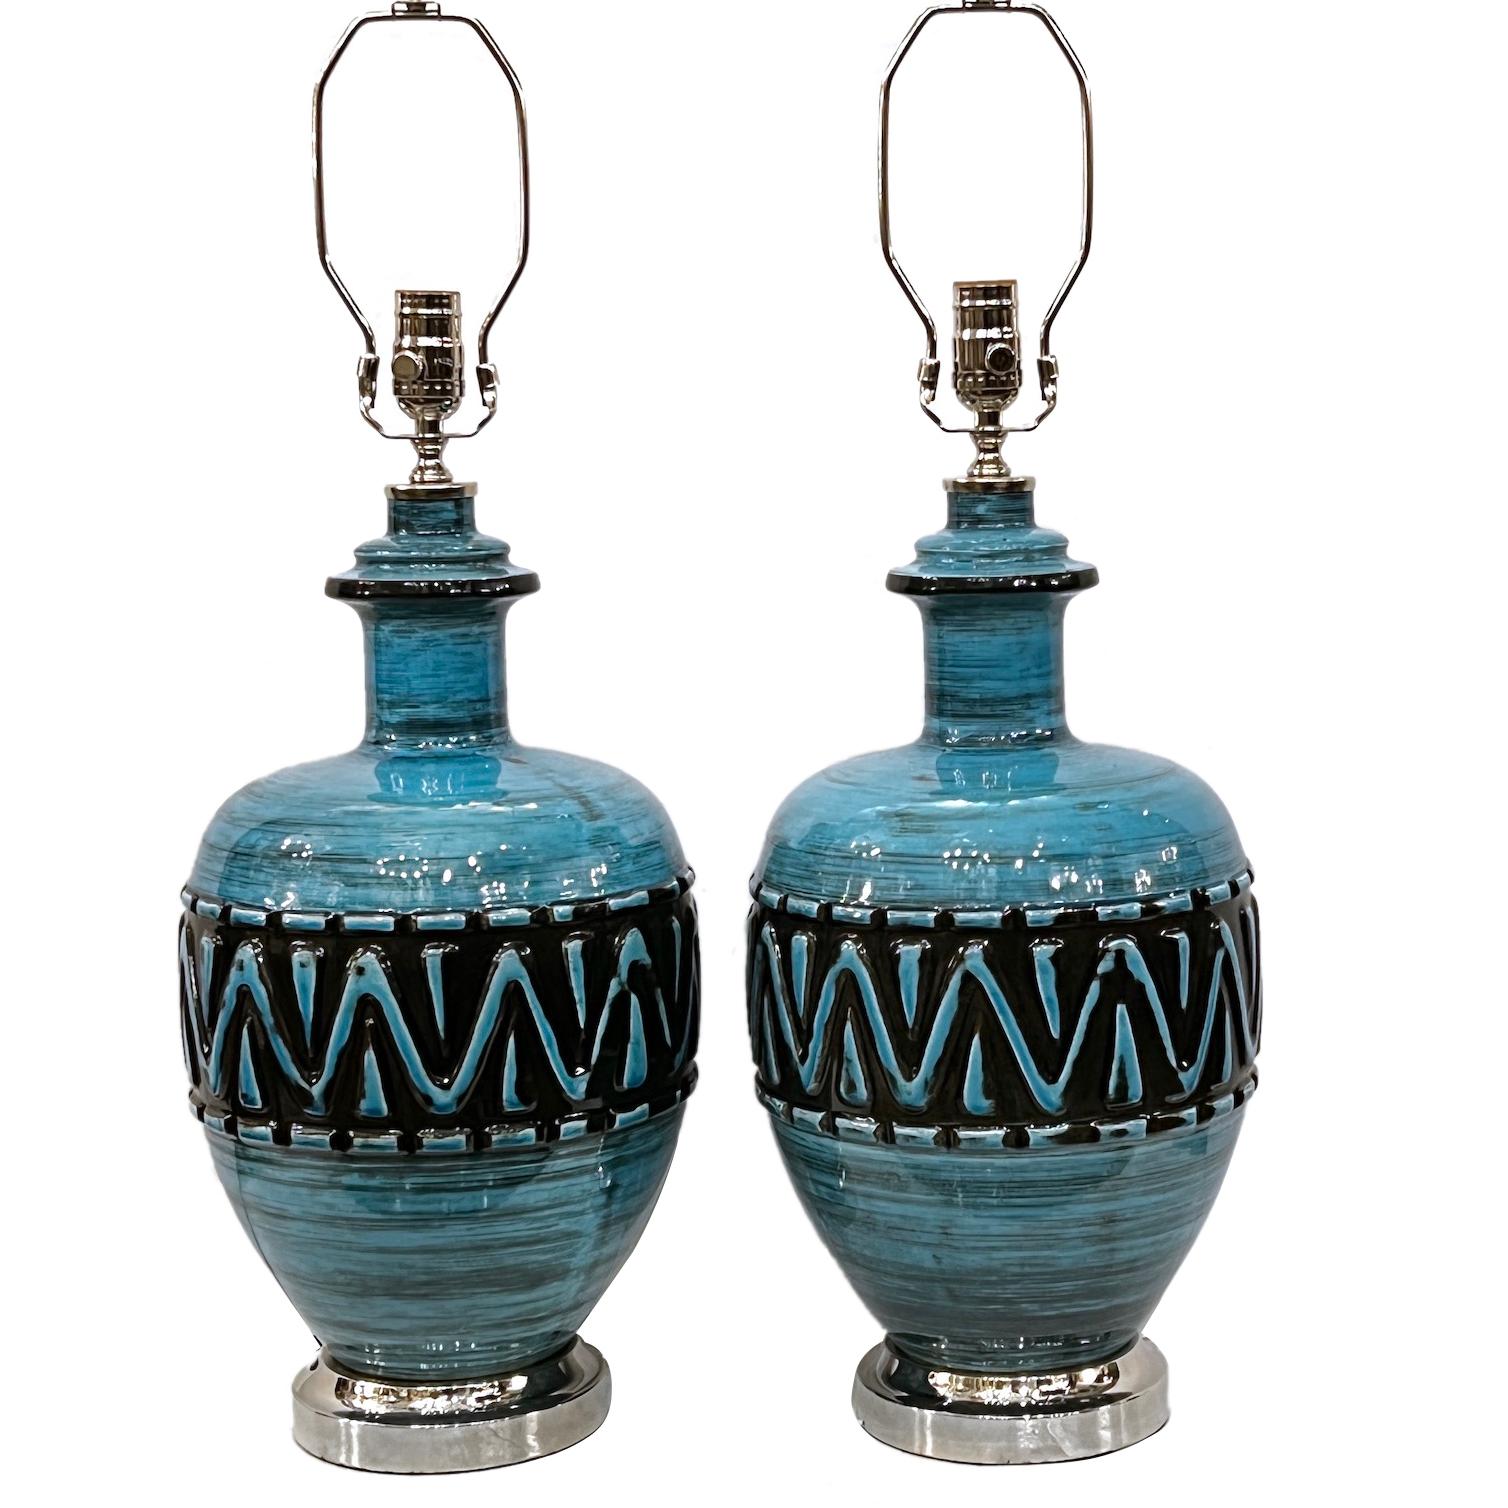 Pair of 1960's Italian blue and black porcelain table lamps. 

Measurements:
Height of body: 19